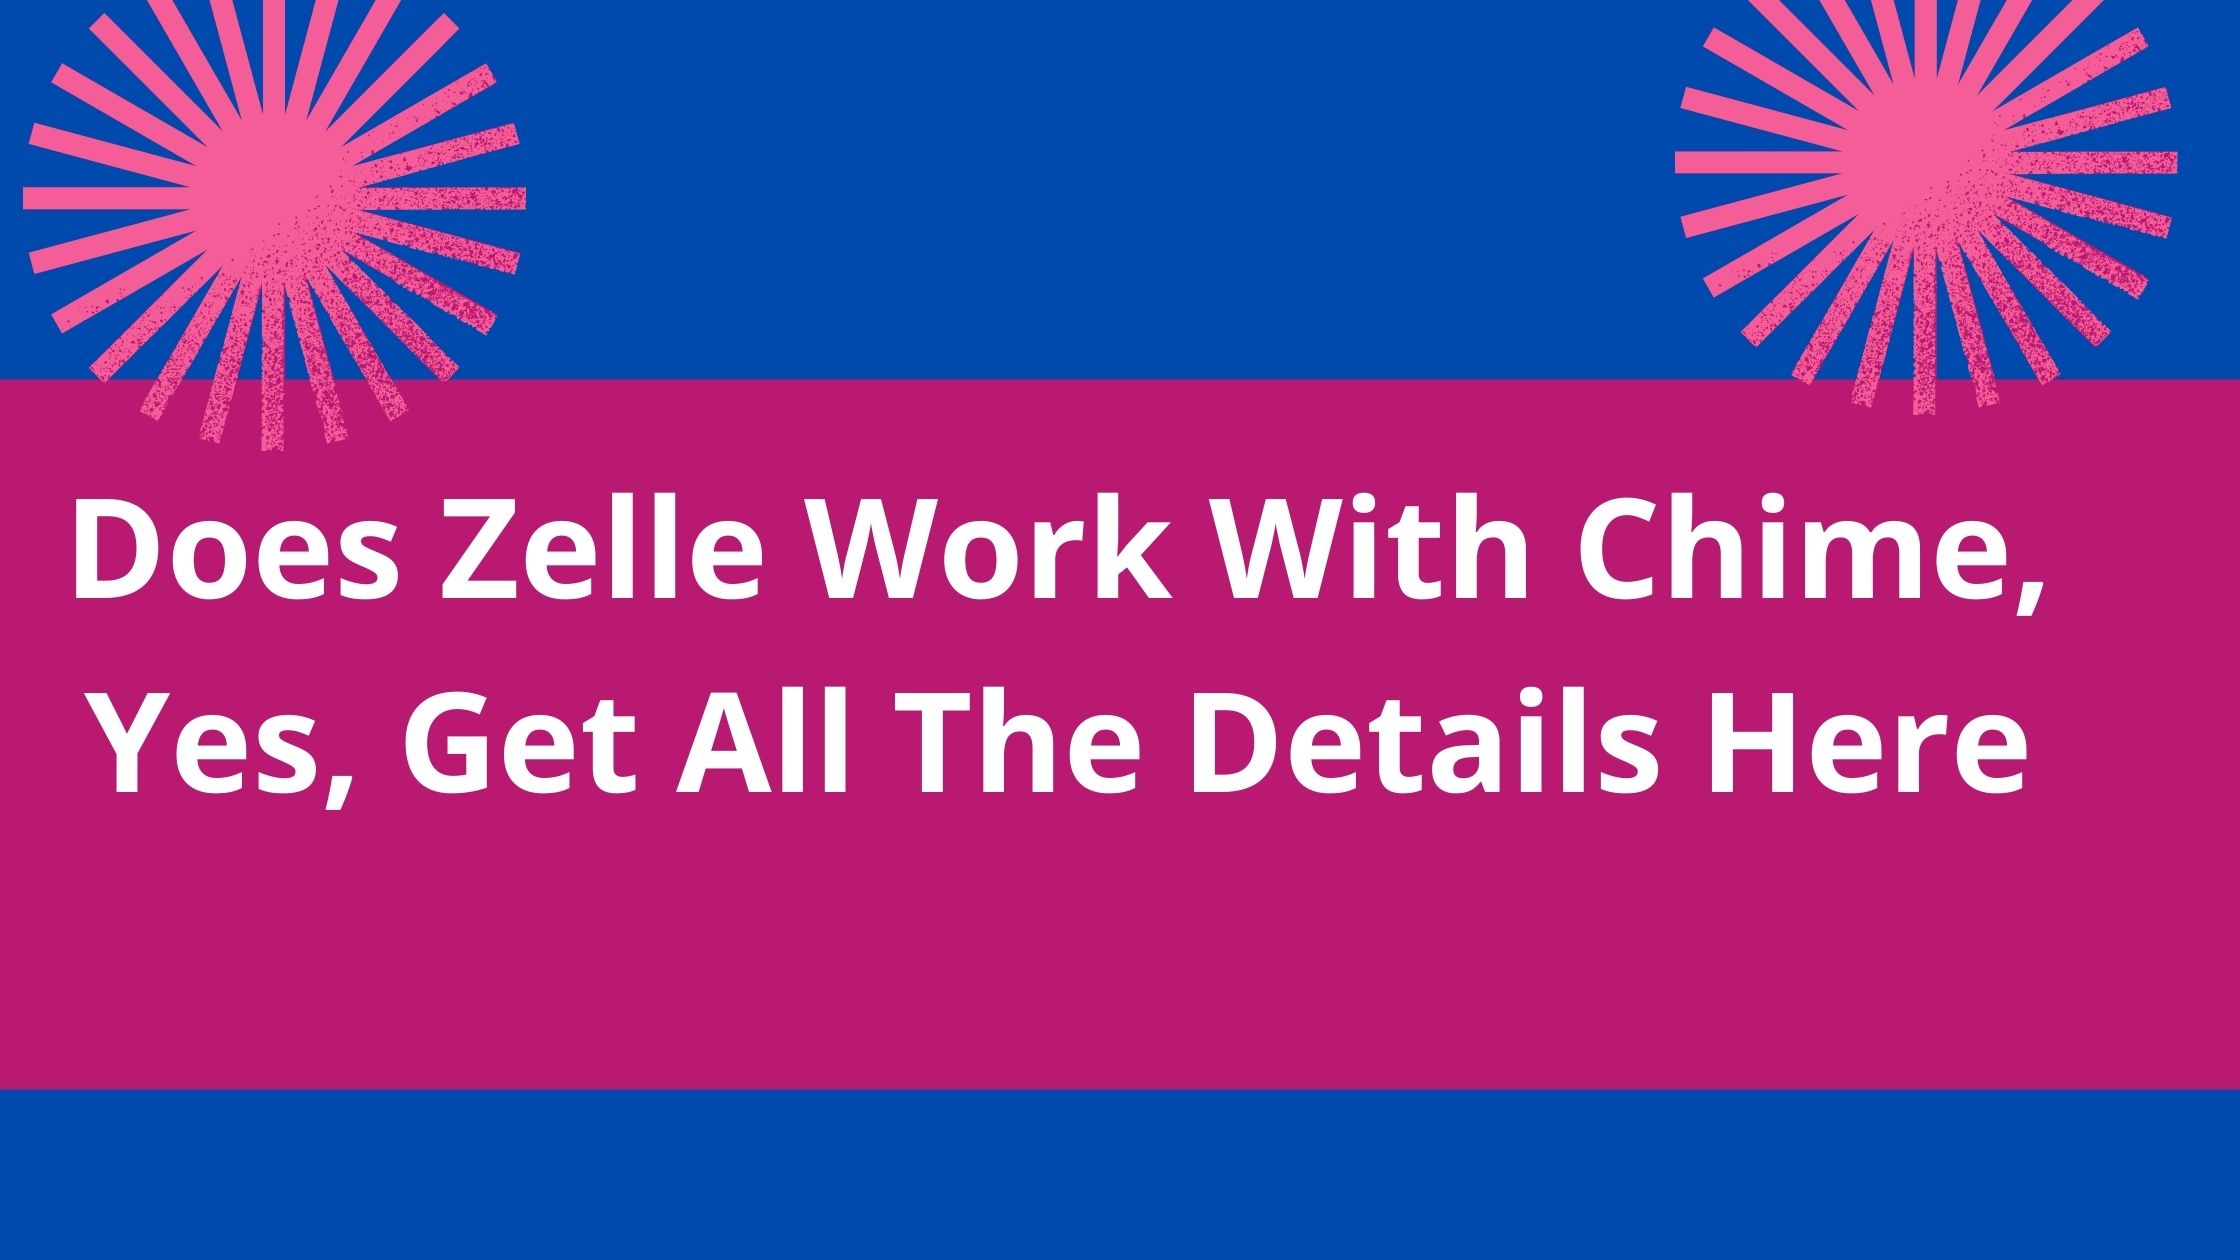 Does Zelle Work With Chime, 2022, Yes, Chime Work With Zelle